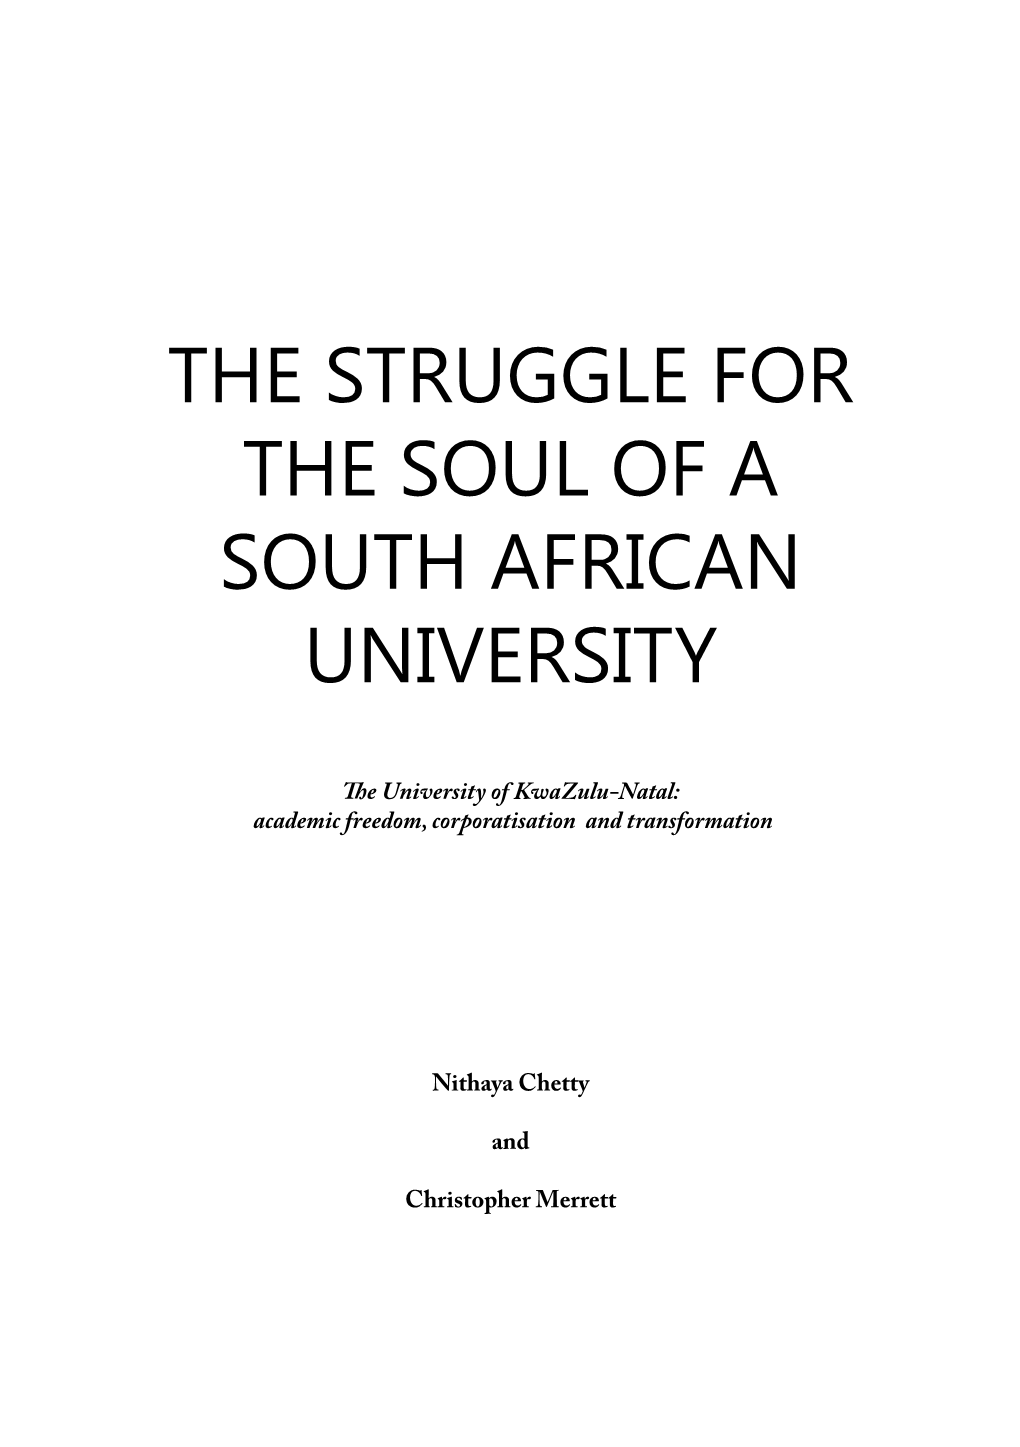 The Struggle for the Soul of a South African University